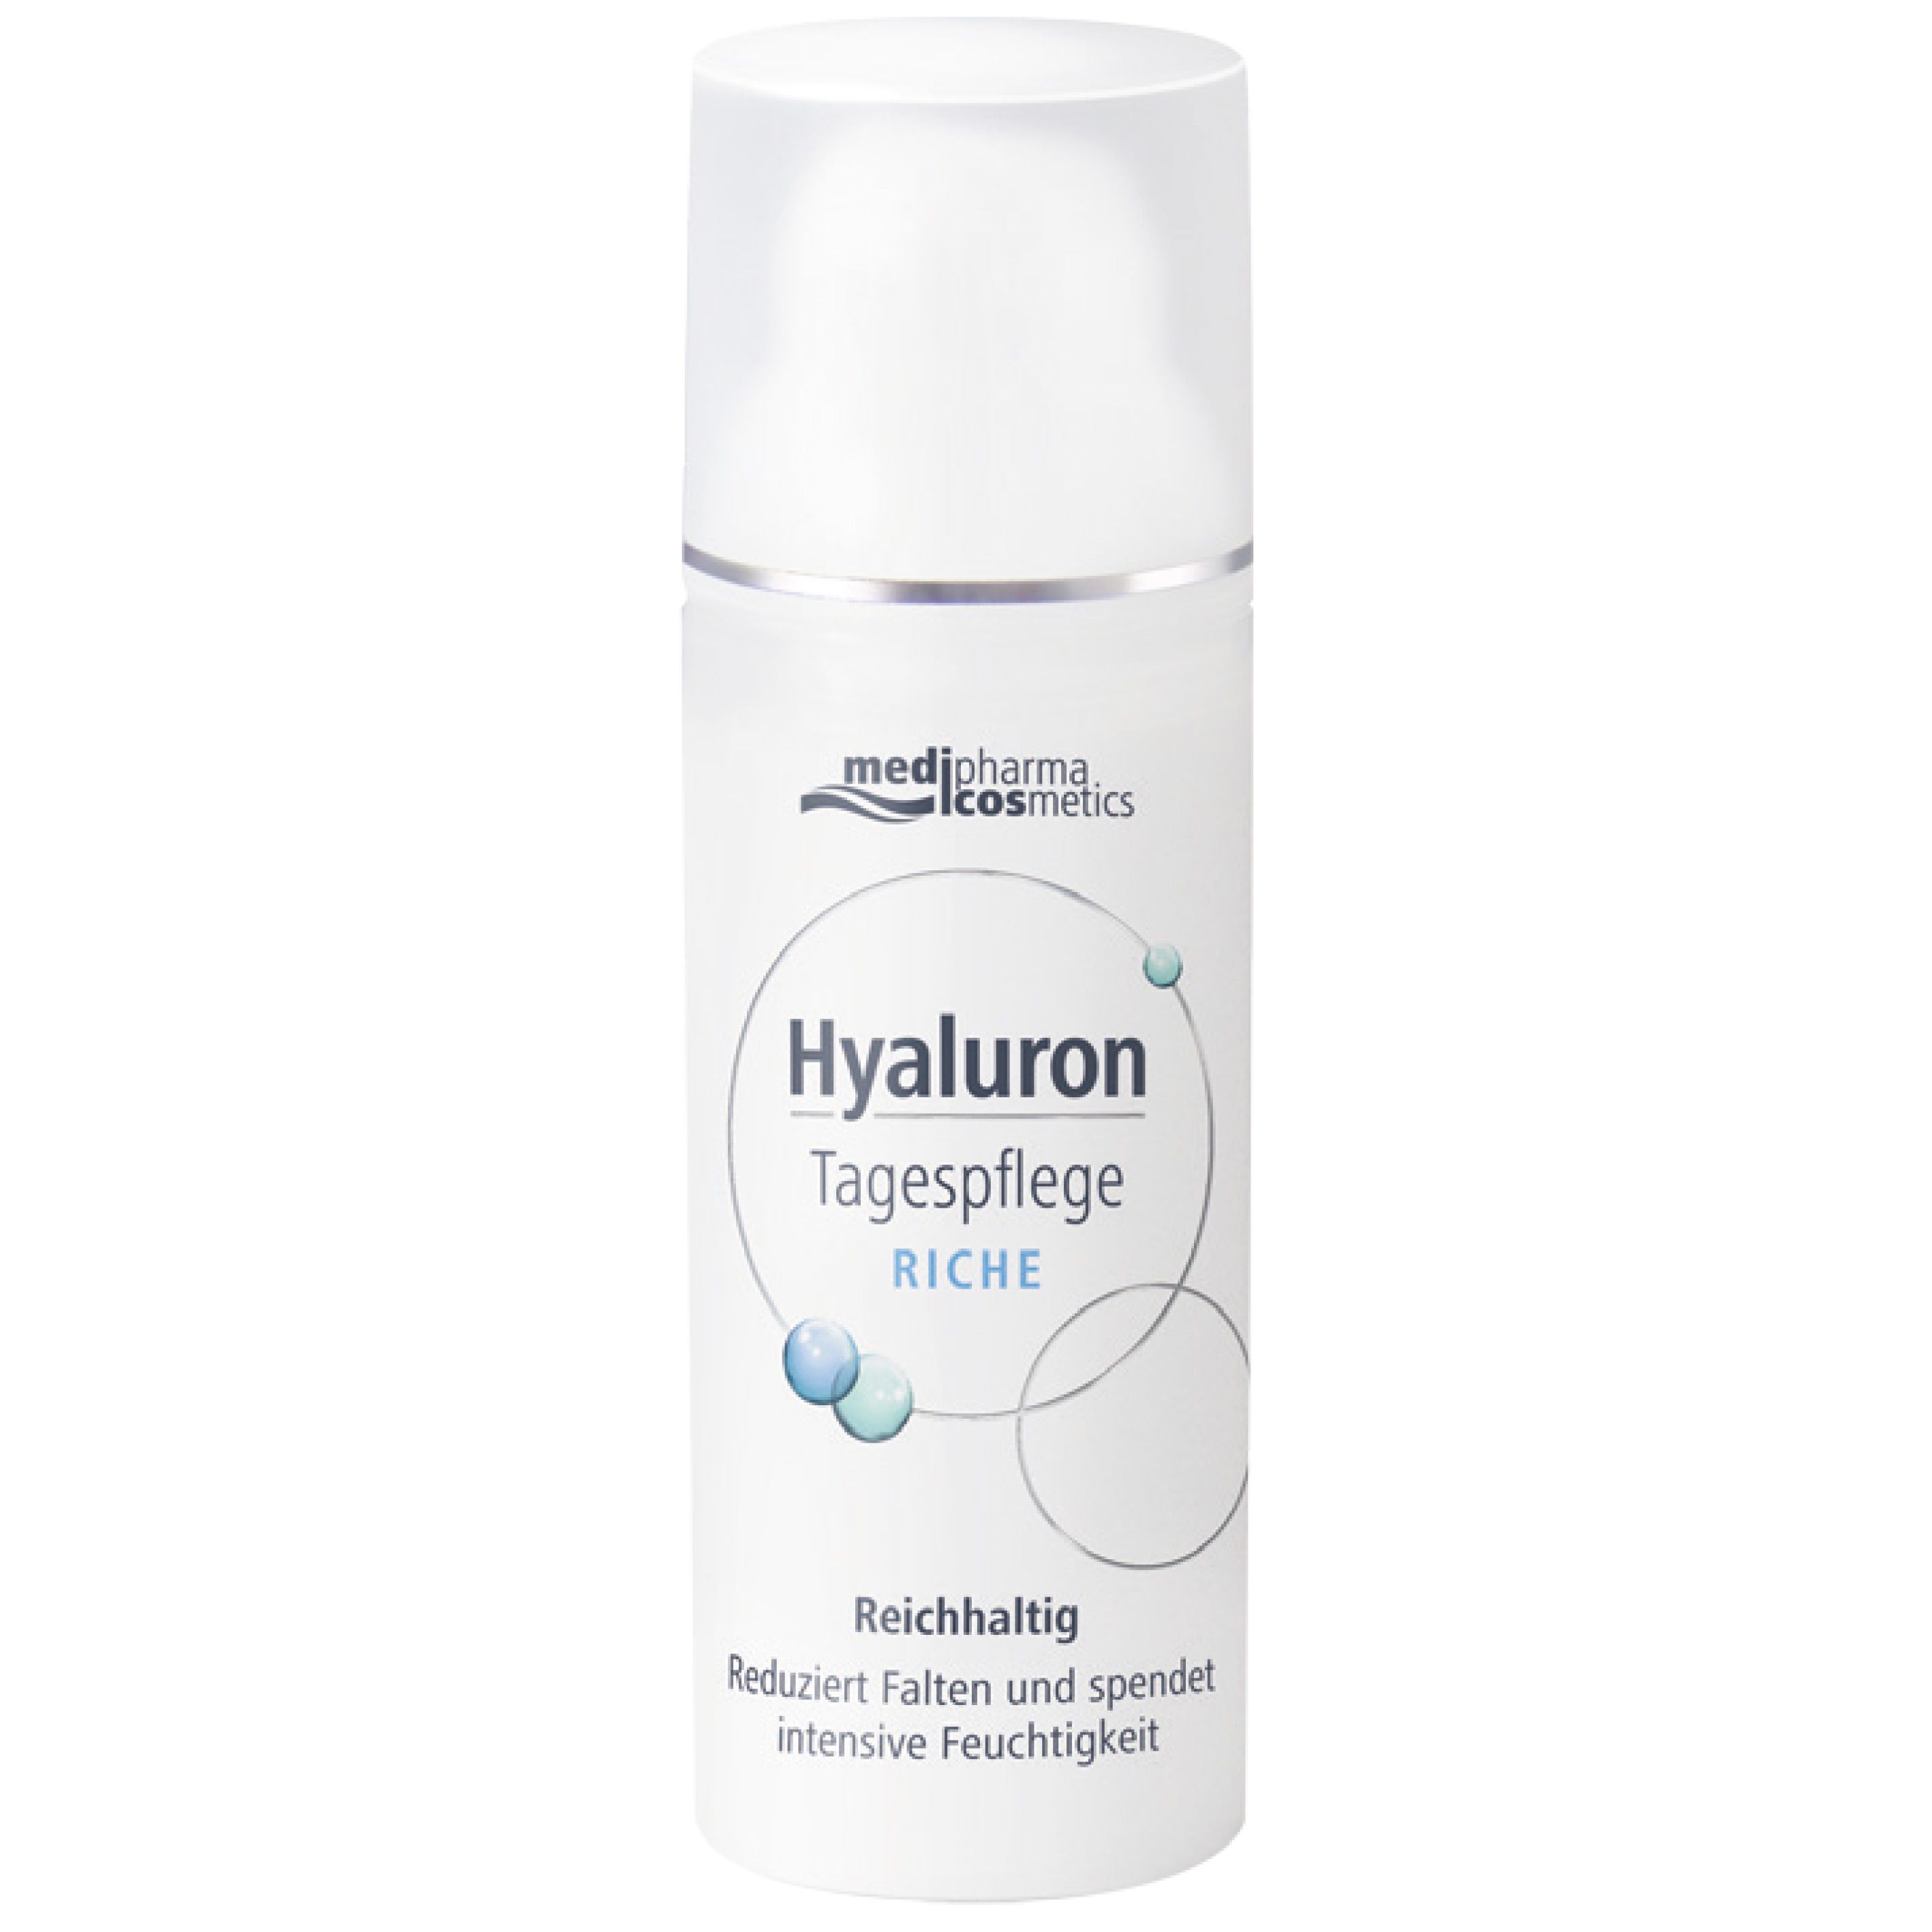 medipharma cosmetics Hyaluron Tagespflege riche